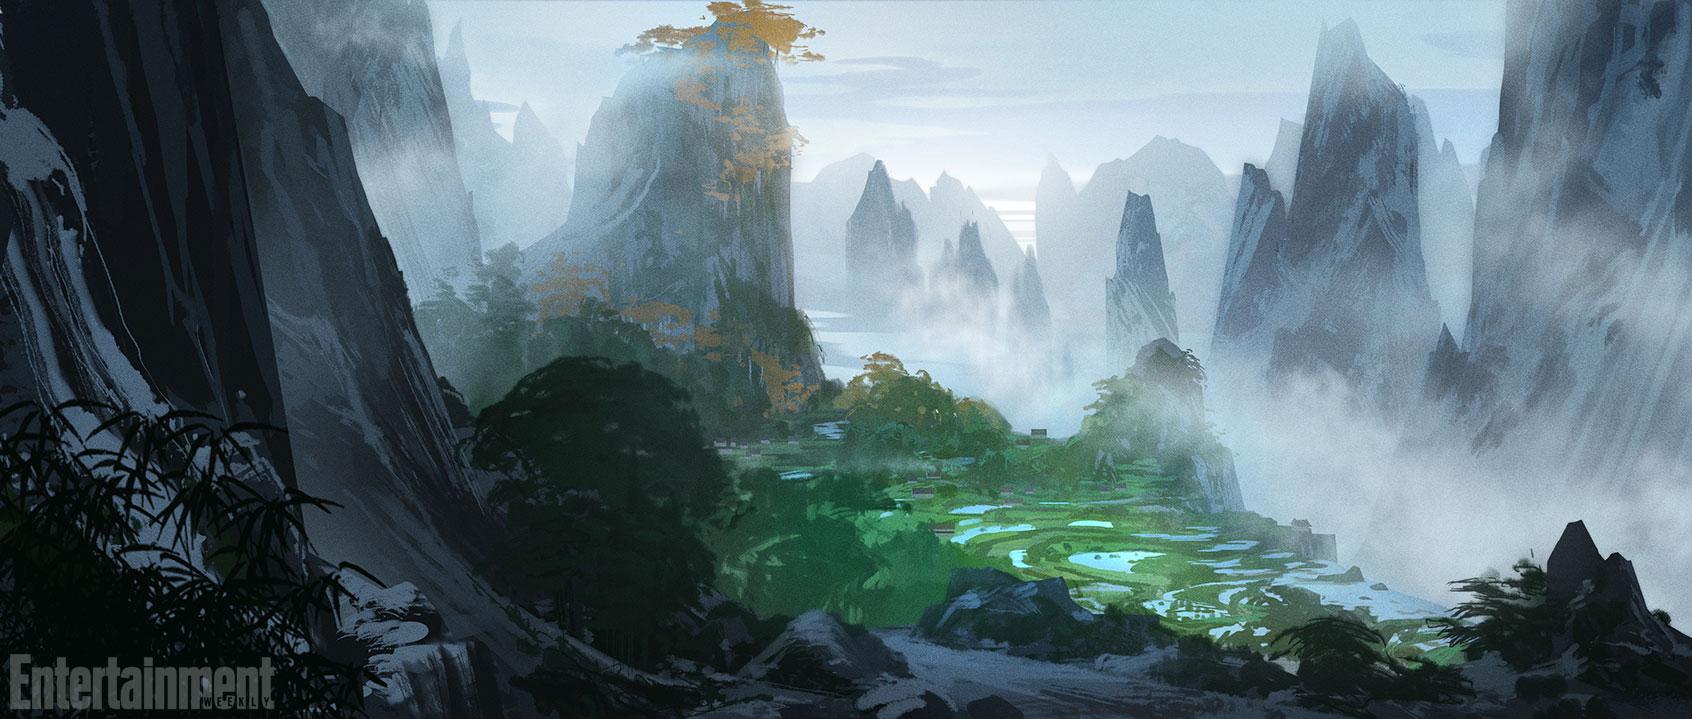 Kung Fu Panda Exclusive See Concept Art And Cinemagraphs Of